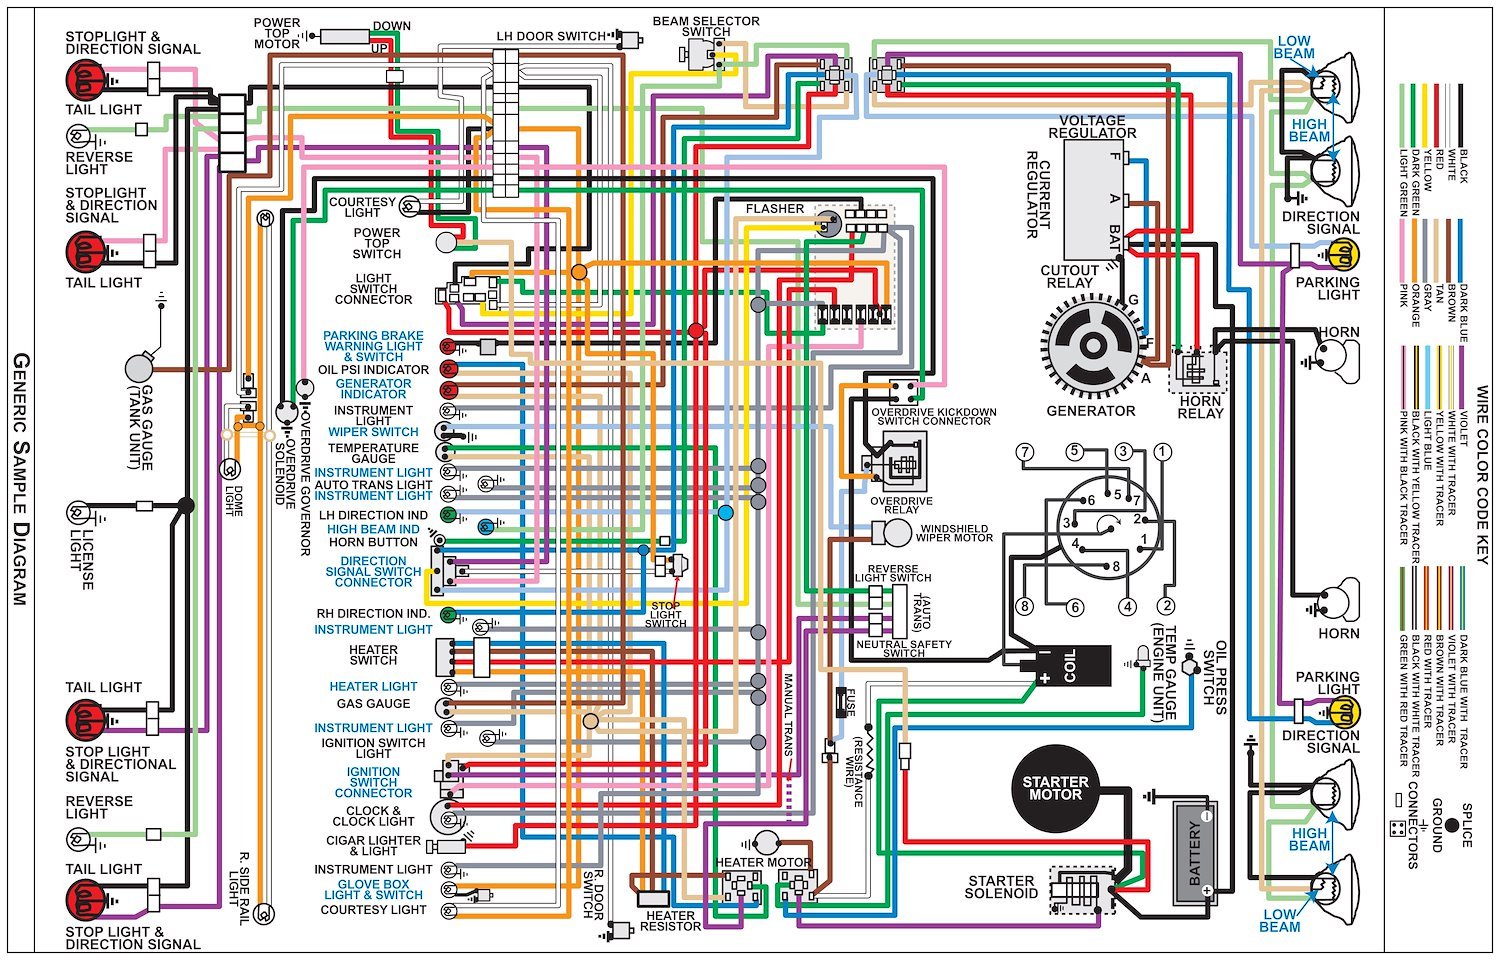 Wiring Diagram for 1961 Ford E-Series (Econoline), 11 in x 17 in., Laminated